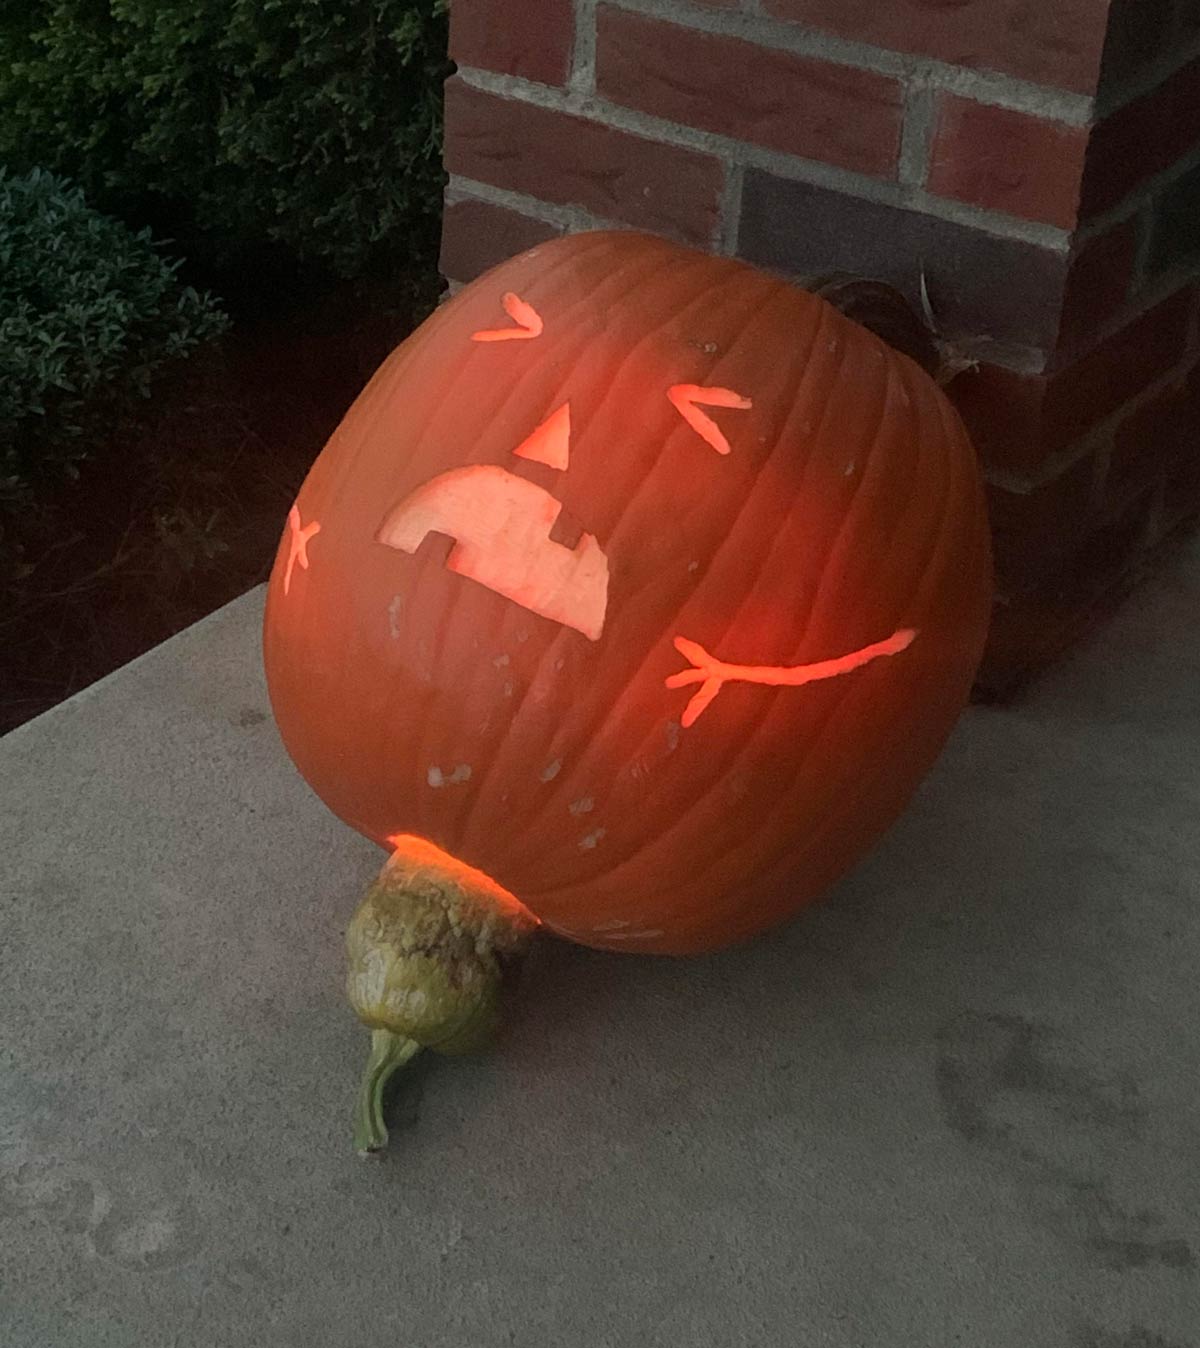 I’m prouder of my pumpkin this year than I should be